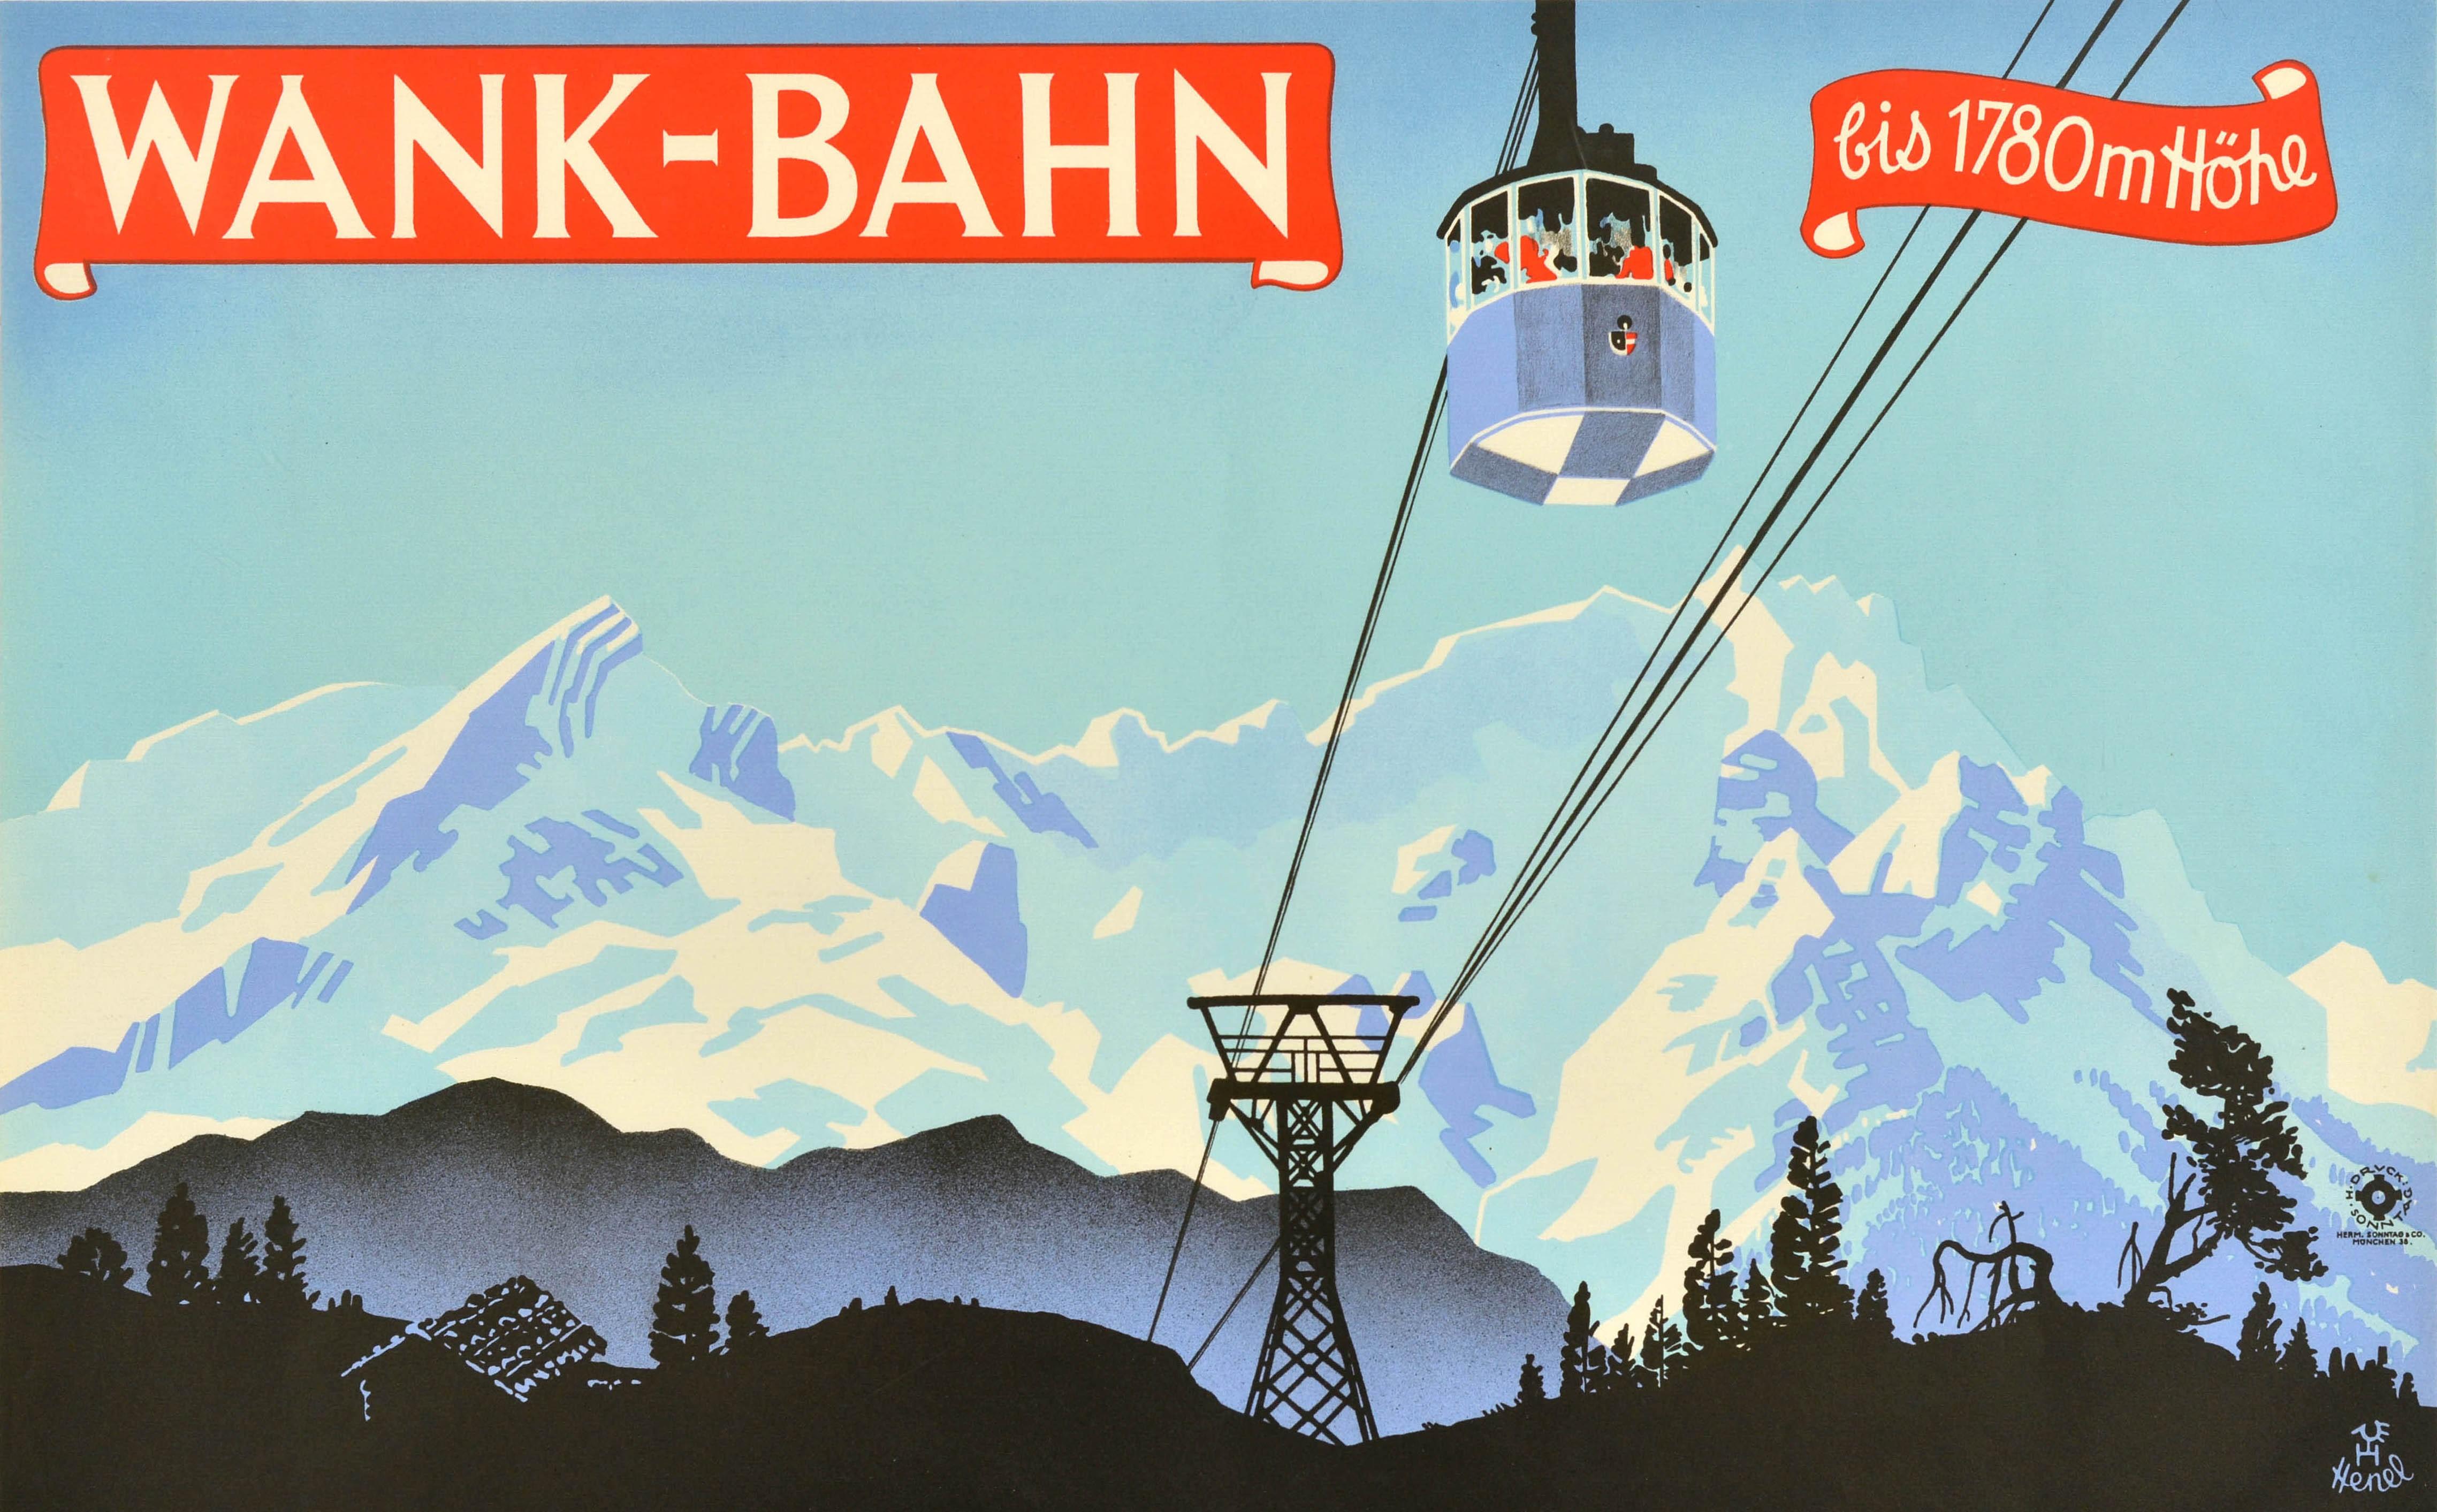 Original vintage winter sport travel poster advertising the Wank-bahn bis 1780m hohe / up to 1780m cable car on the Wank mountain near the Garmisch-Partenkirchen alpine ski resort town in Bavaria Germany featuring great artwork showing people riding